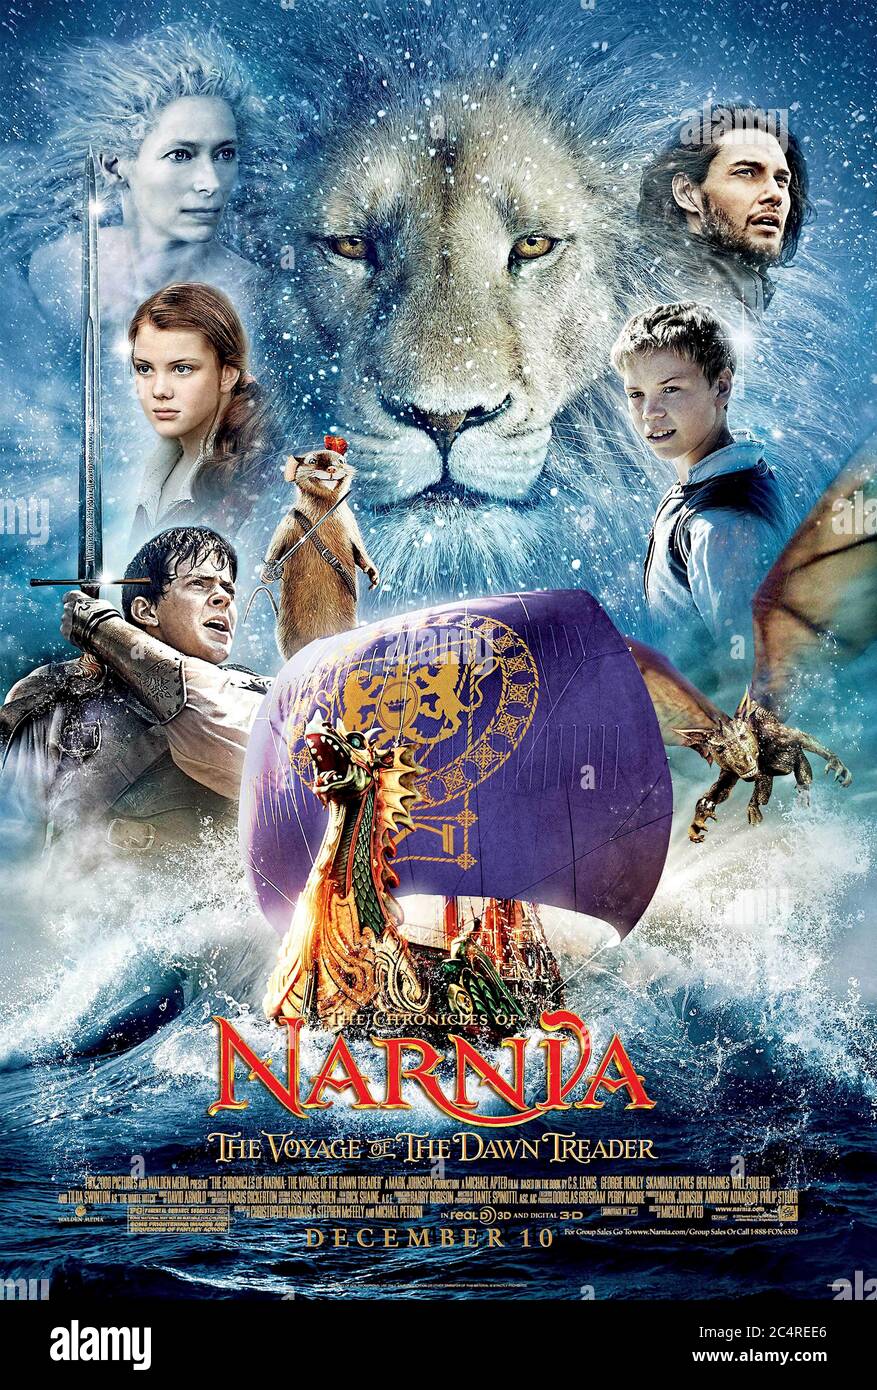 The Chronicles of Narnia: The Voyage of the Dawn Treader (2010) directed by Michael Apted and starring Ben Barnes, Skandar Keynes, Georgie Henley and Will Poulter. Adaptation of the C.S. Lewis' much loved book, Lucy and Edmund return to the magical land of Narnia. Stock Photo